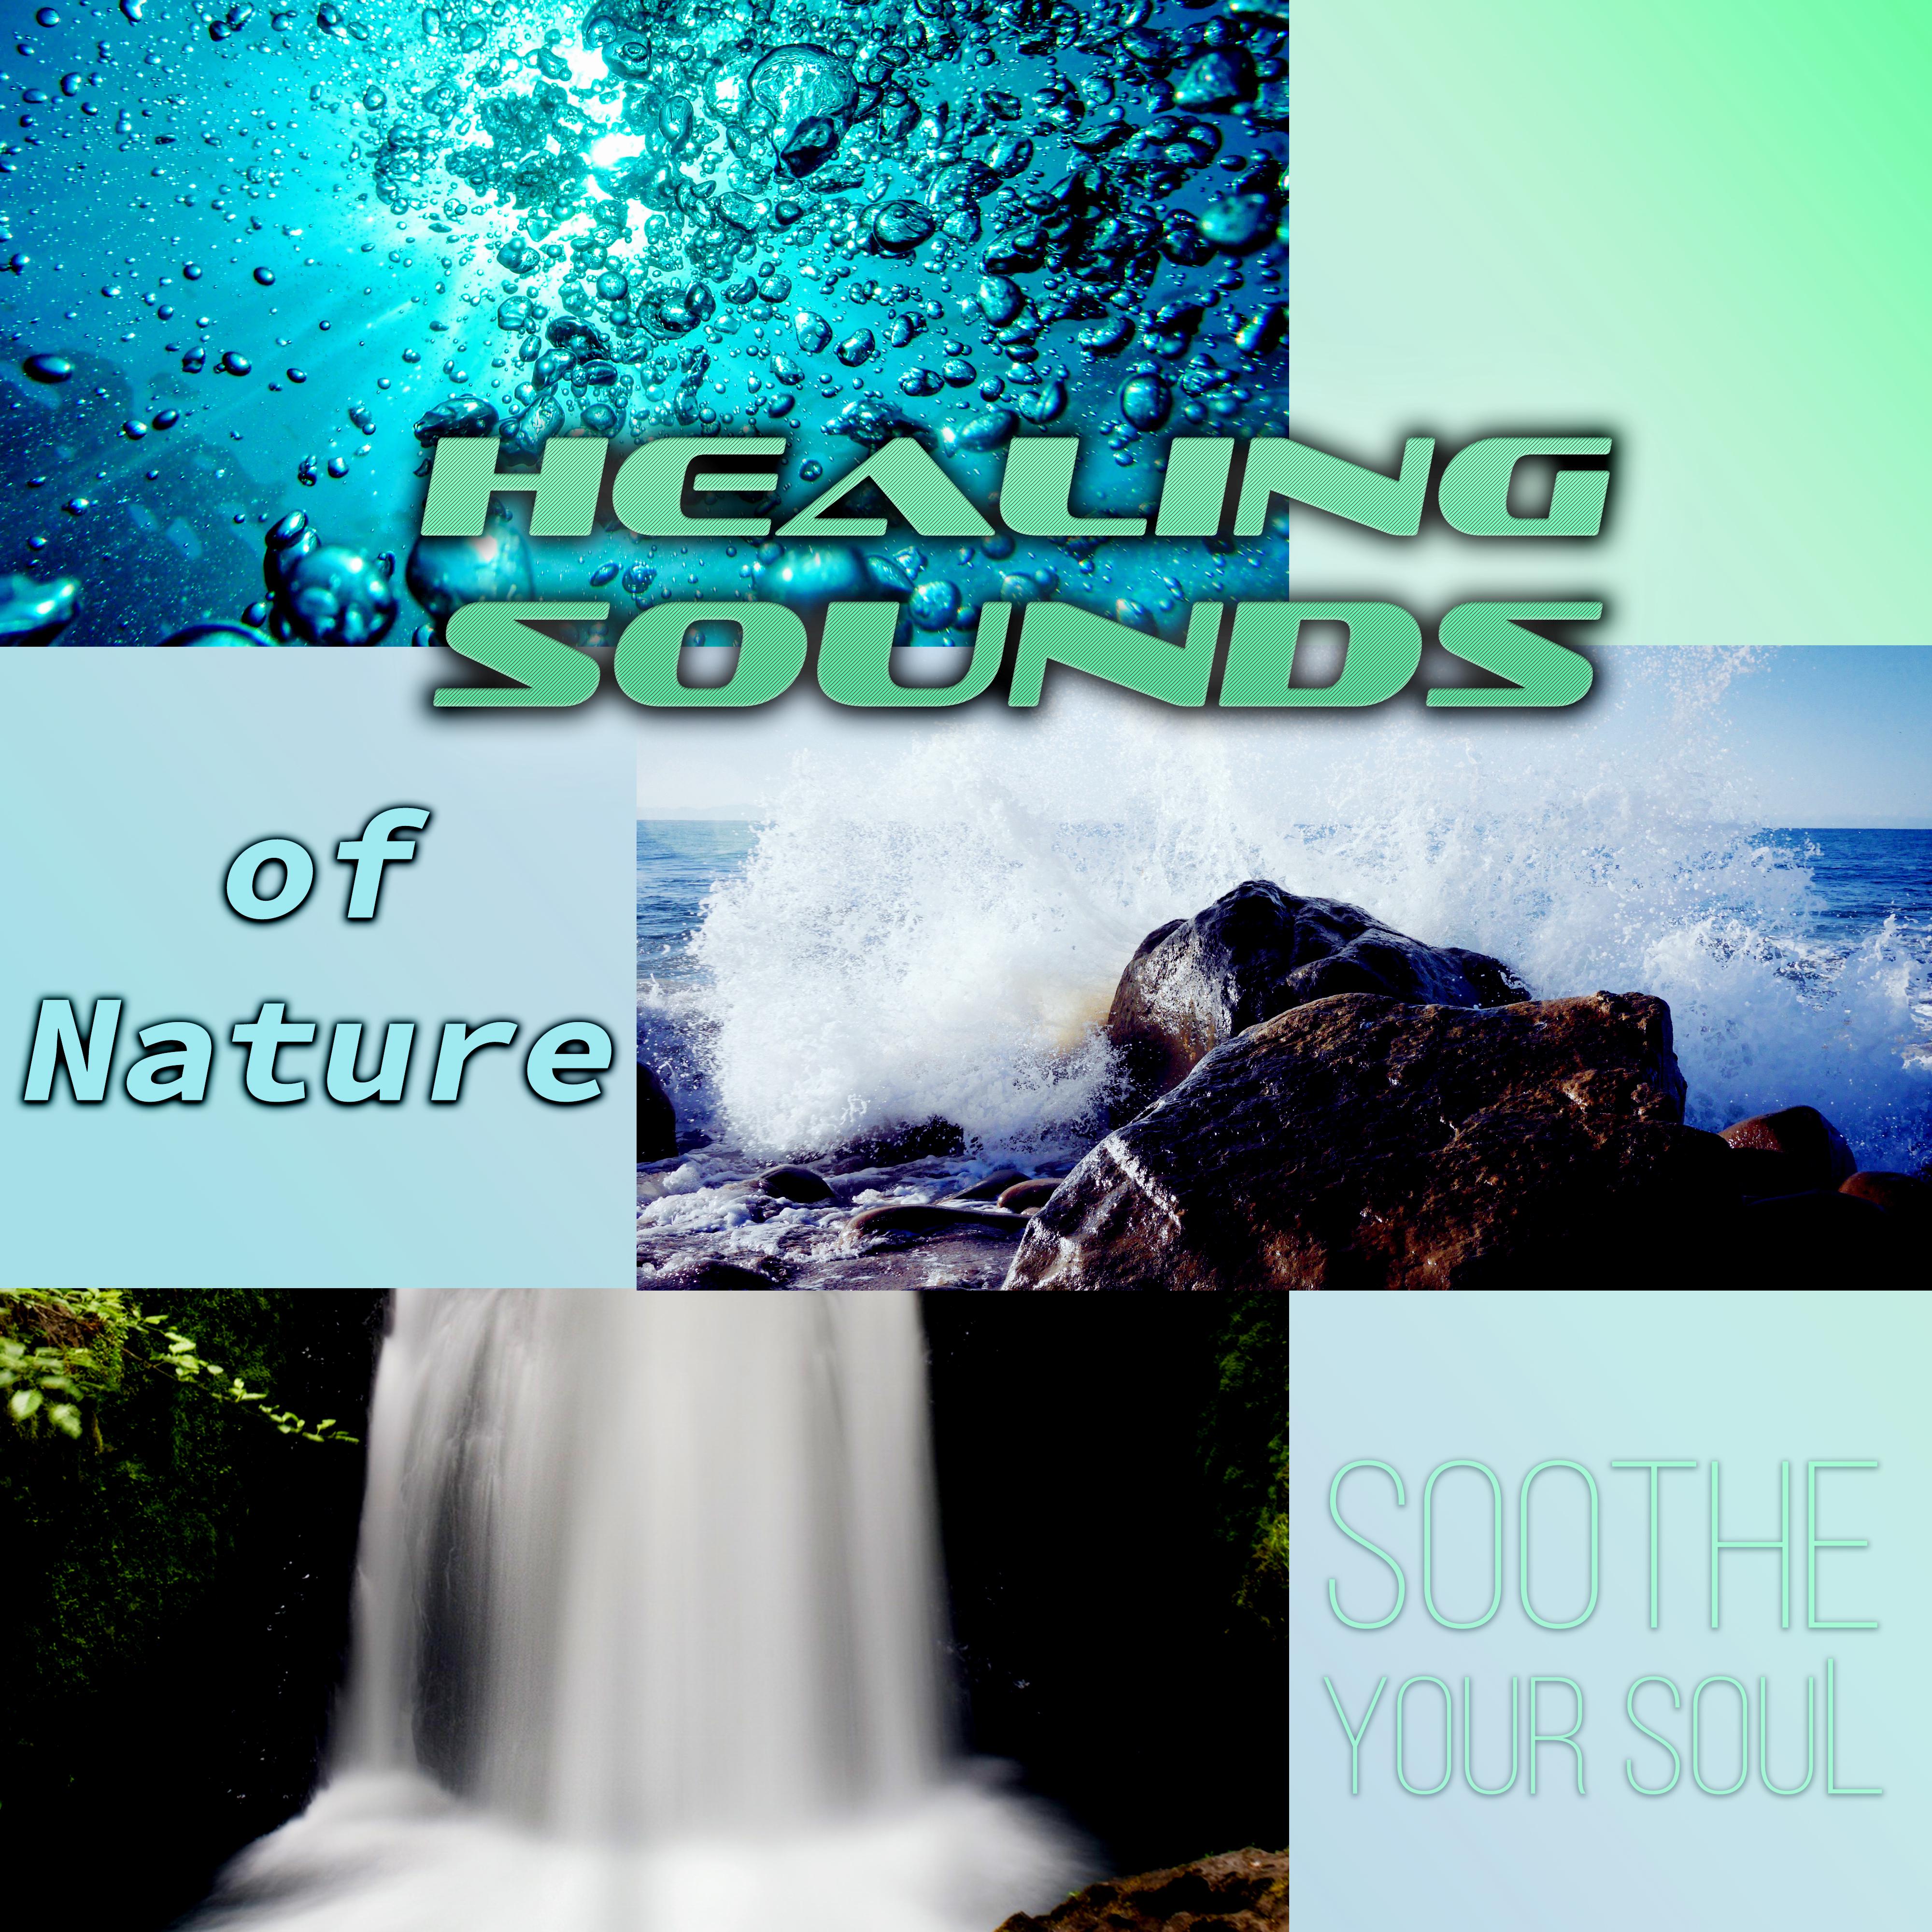 Healing Sounds of Nature - Music for Deep Sleep, Meditation, Relaxation, Sleep Therapy, Soothe Your Soul, Trouble Sleeping, Dealing with Stress, Piano Instrumental Music